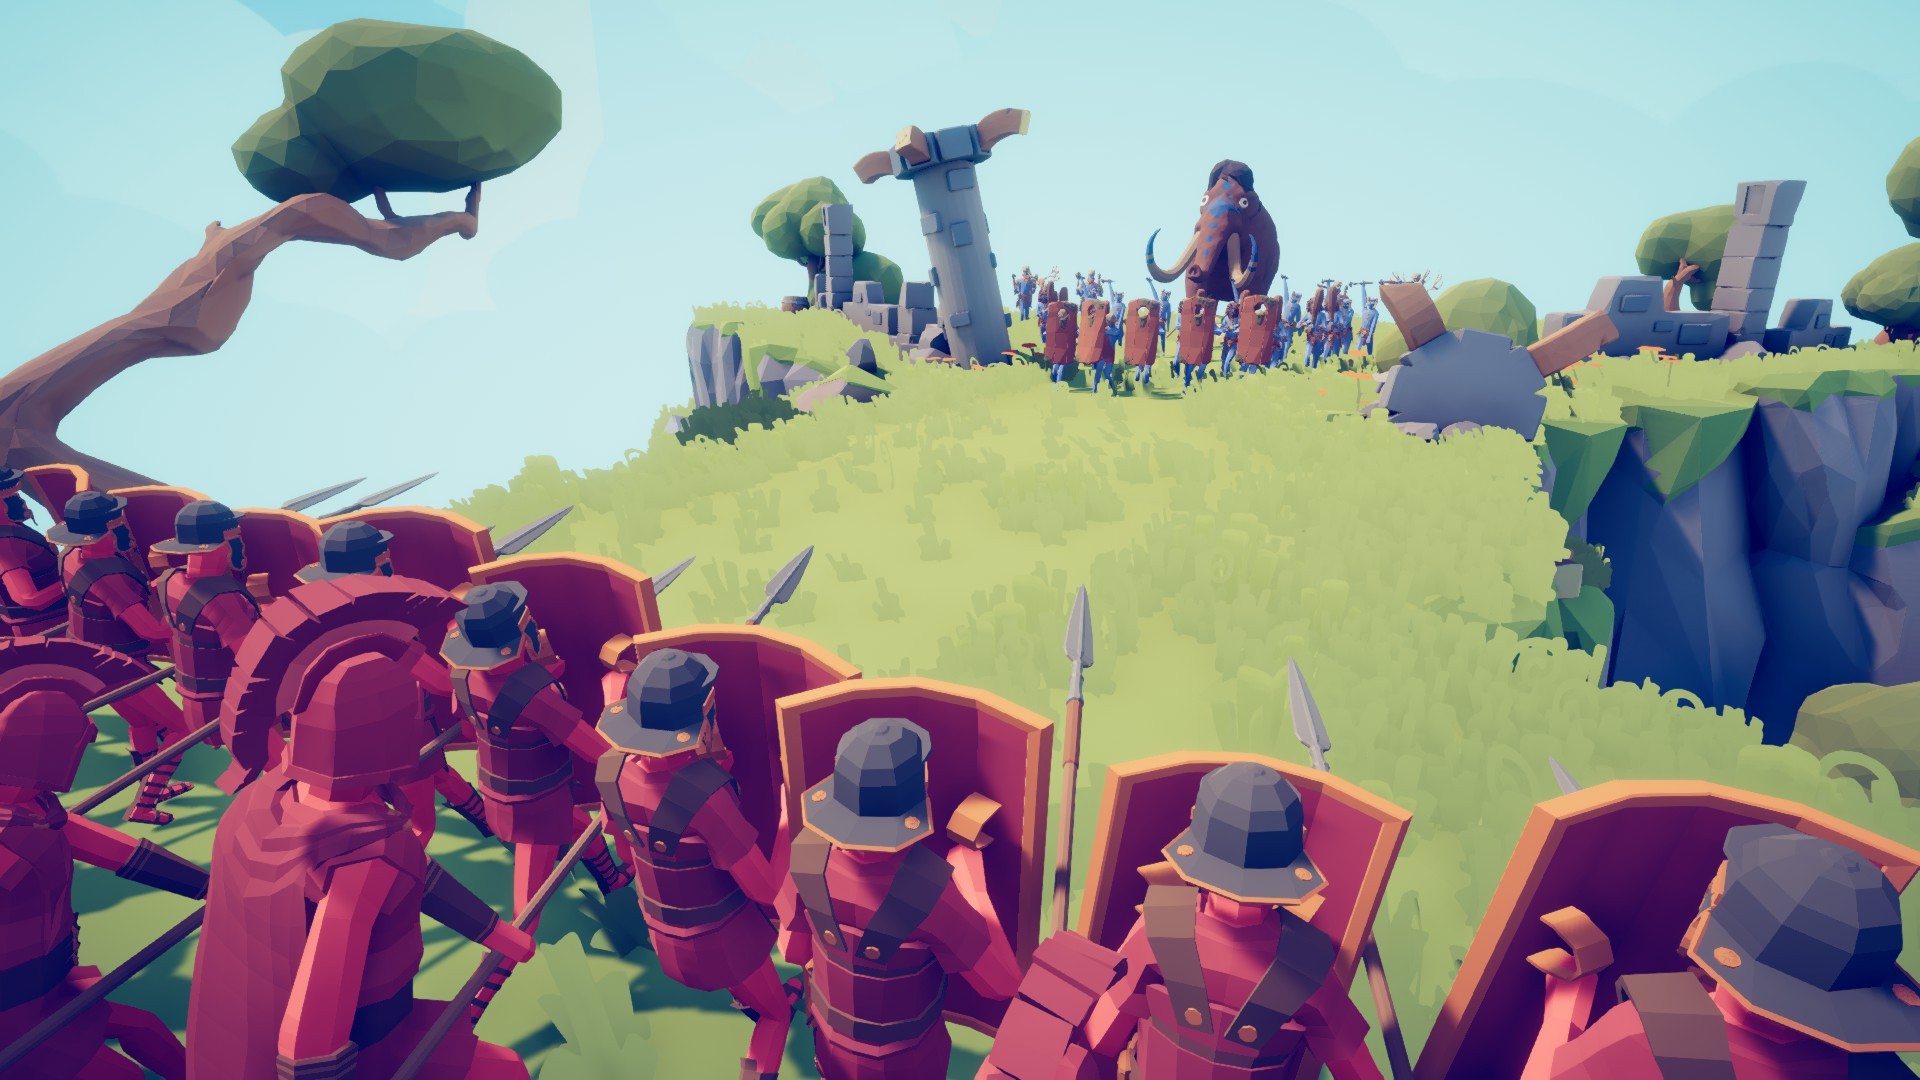 is totally accurate battle simulator free on pc